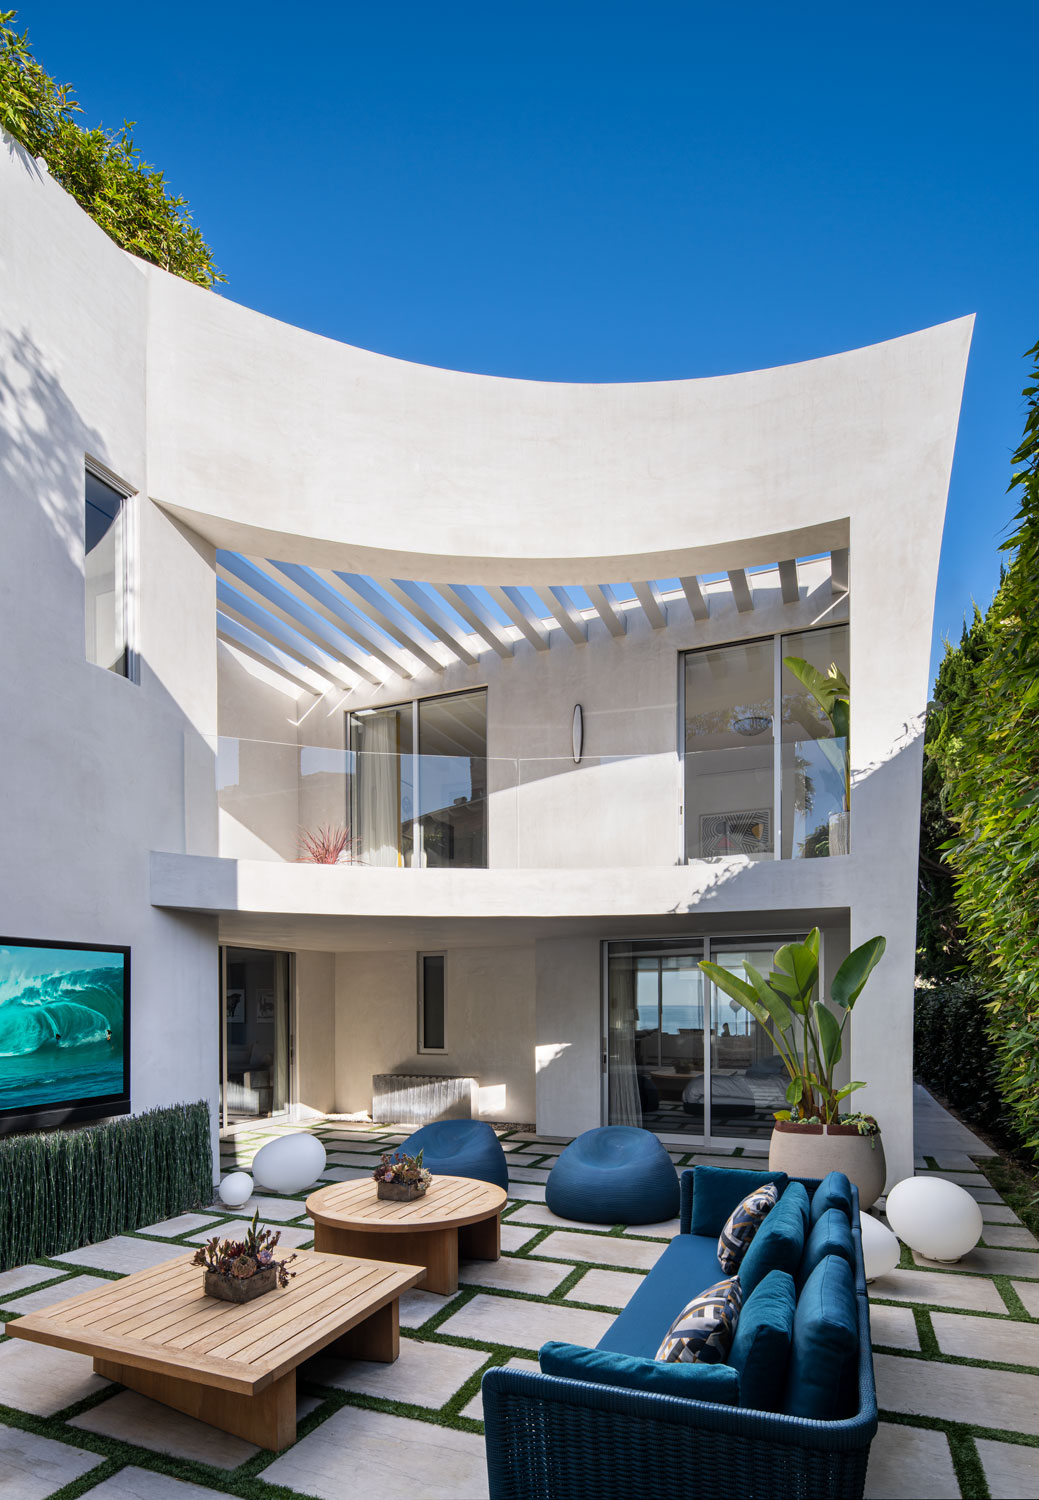 Modern white stucco house with outdoor lounge area and wall-mounted TV